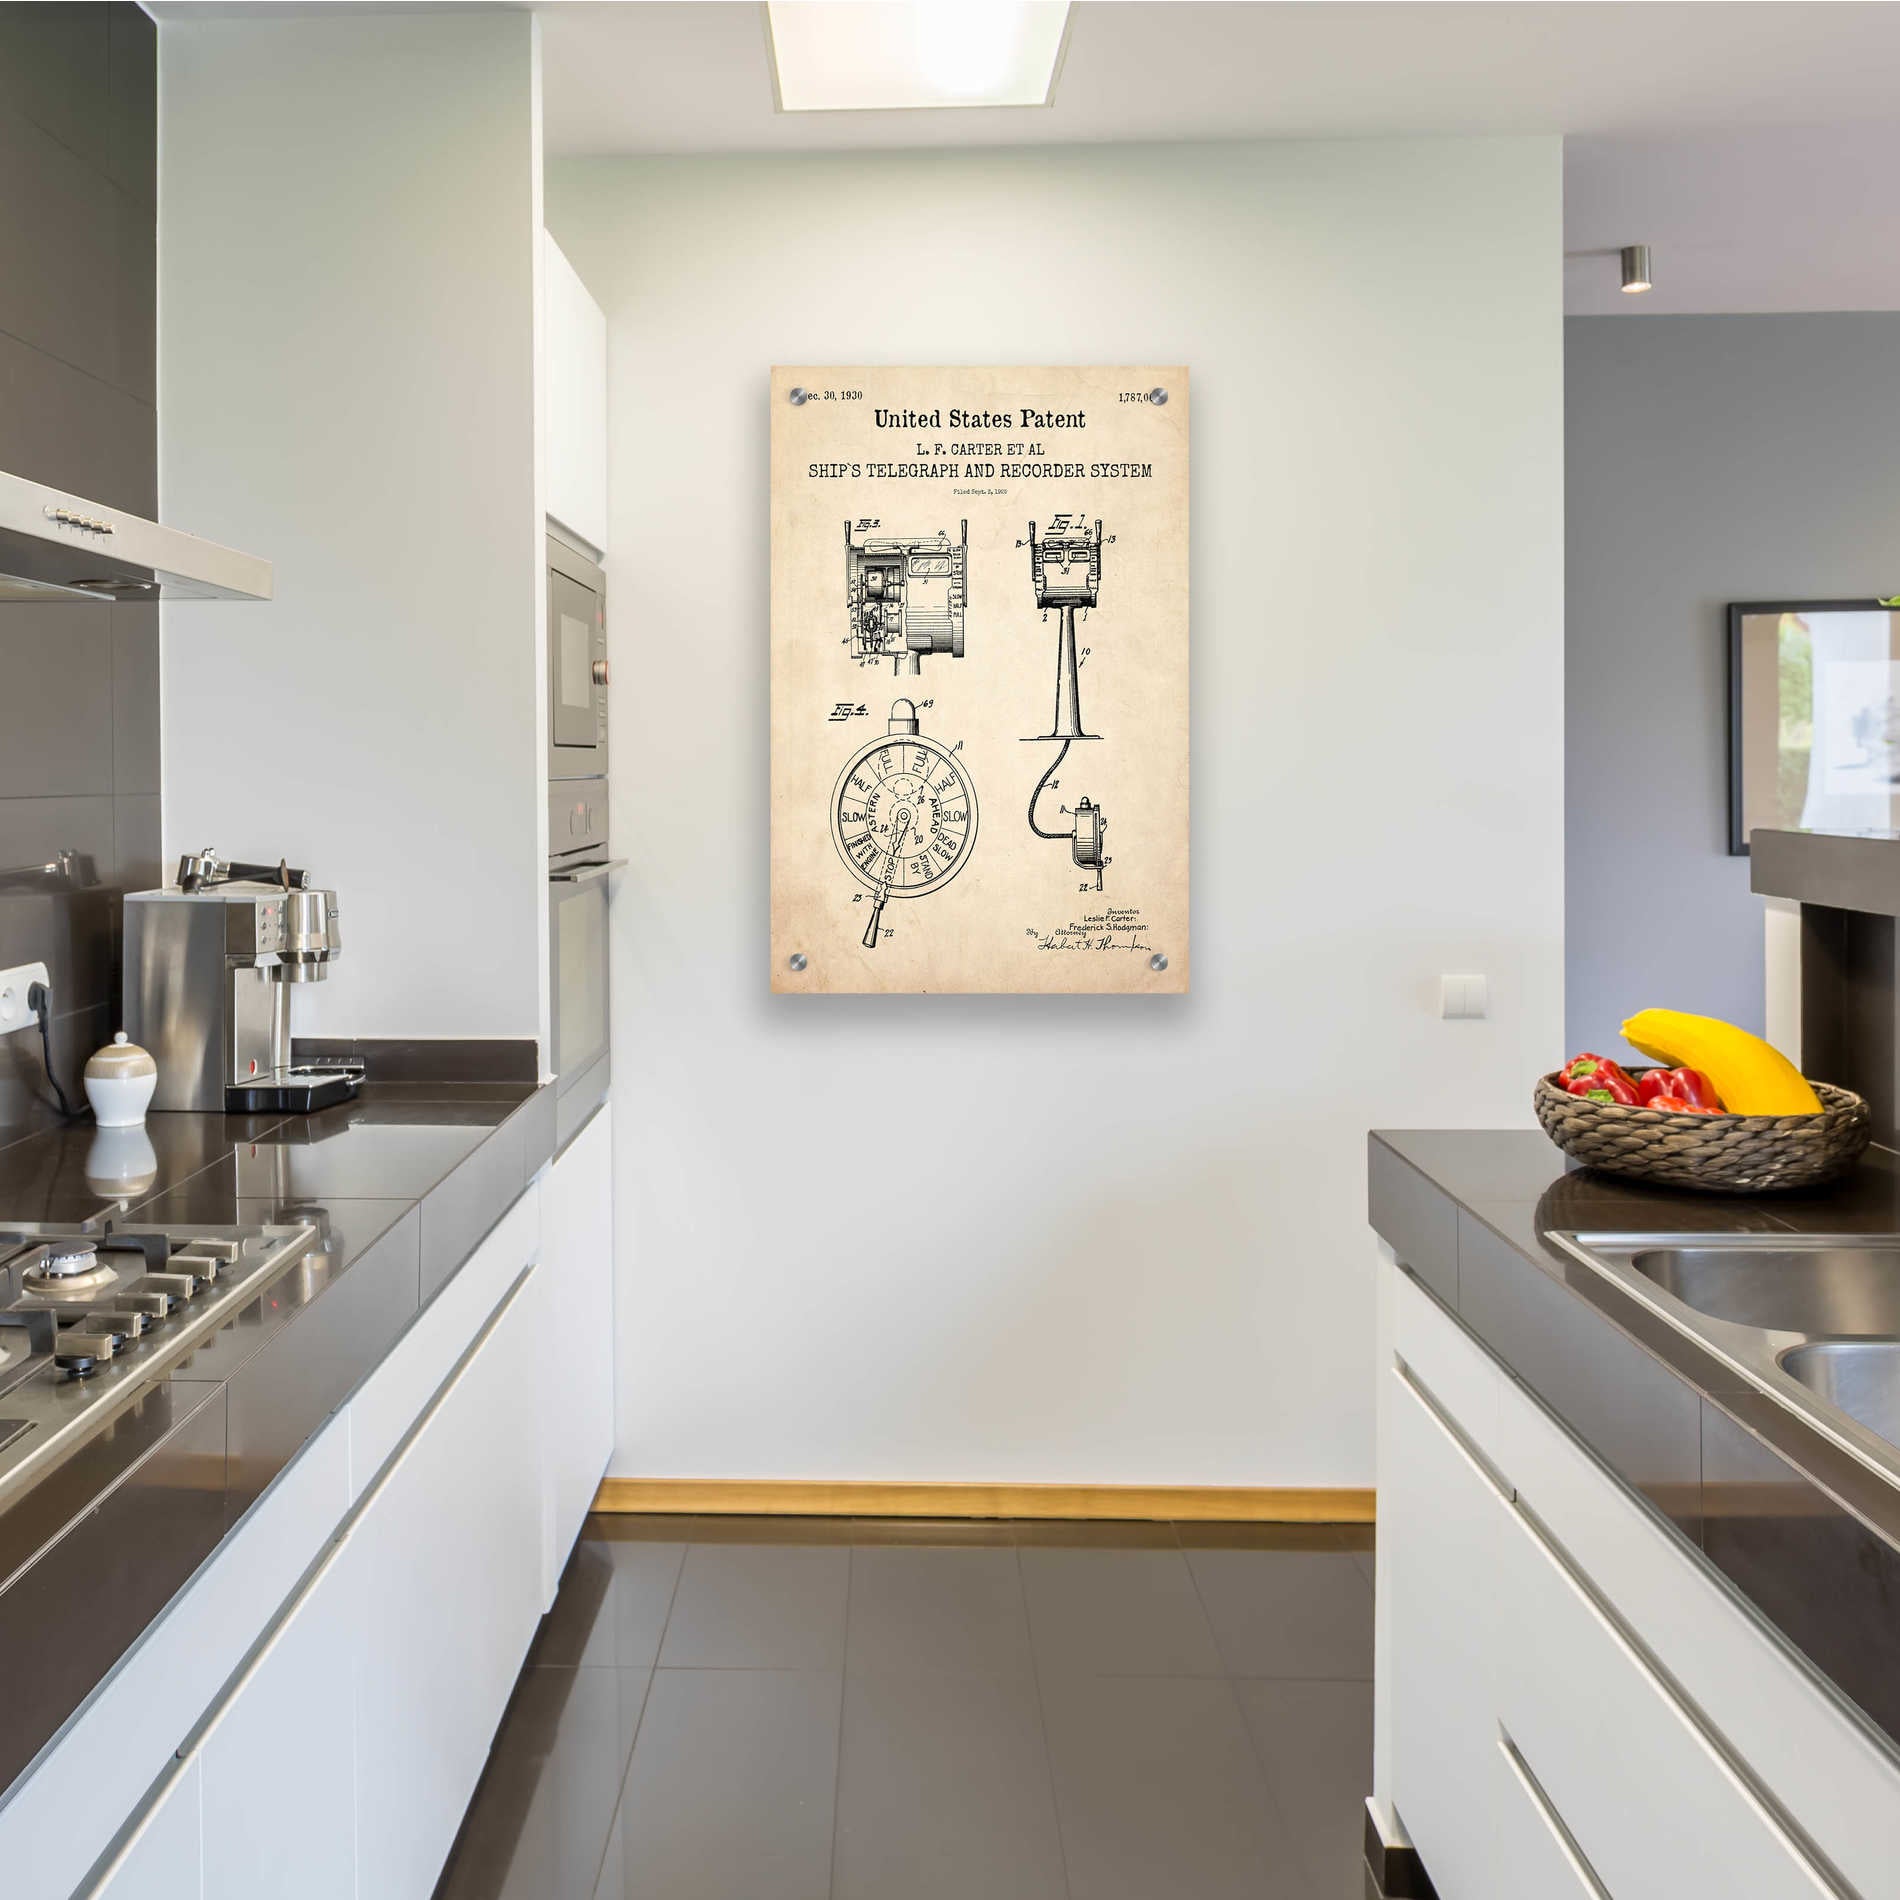 Epic Art 'Ship's Telegraph and Record System Blueprint Patent Parchment,' Acrylic Glass Wall Art,24x36